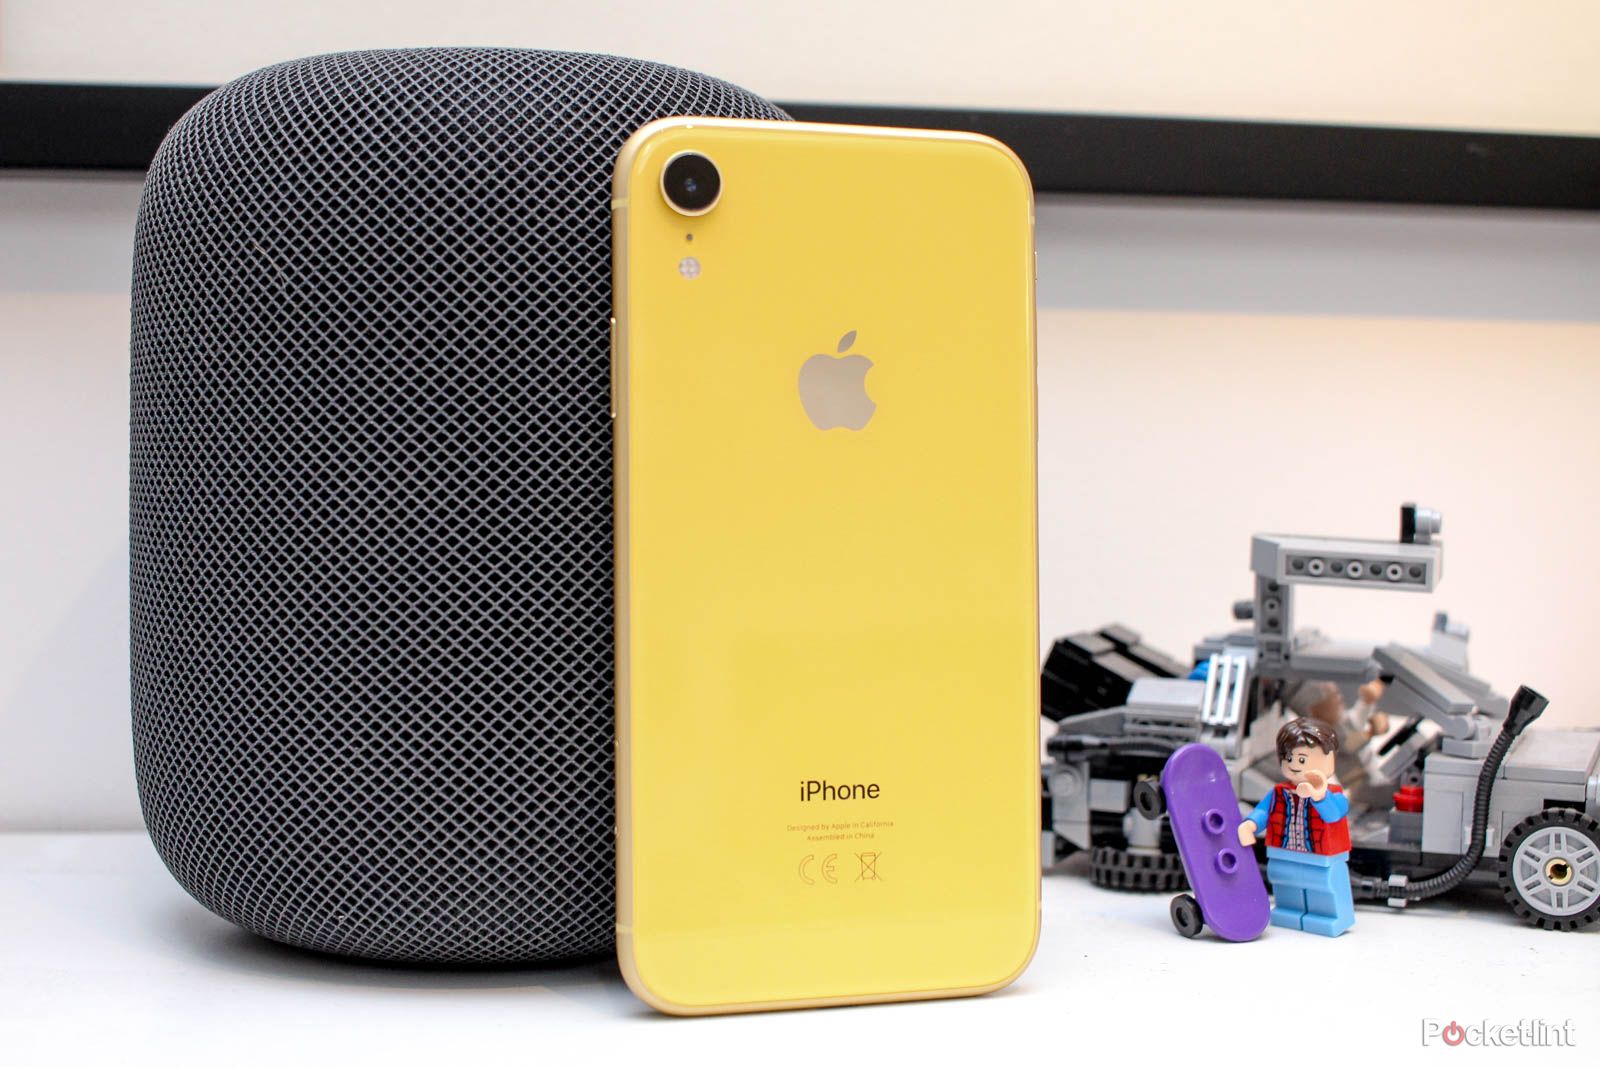 Yellow iPhone XR leaning against a black HomePod